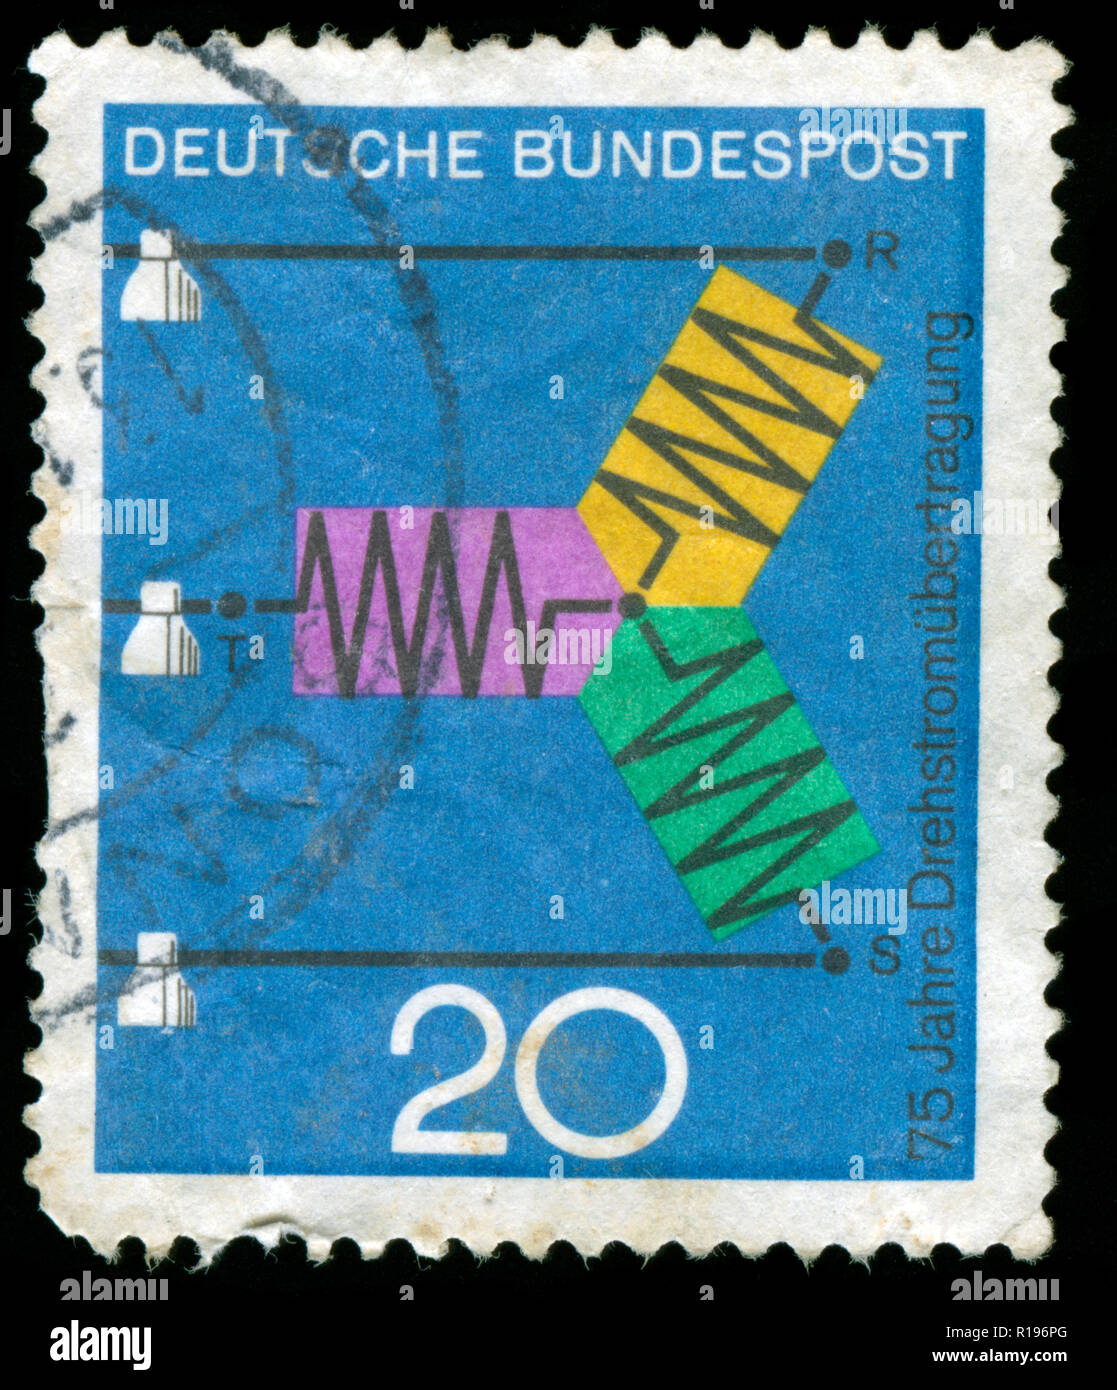 Postmarked stamp from the Federal Republic of Germany in the Scientific Anniversaries series issued in 1966 Stock Photo